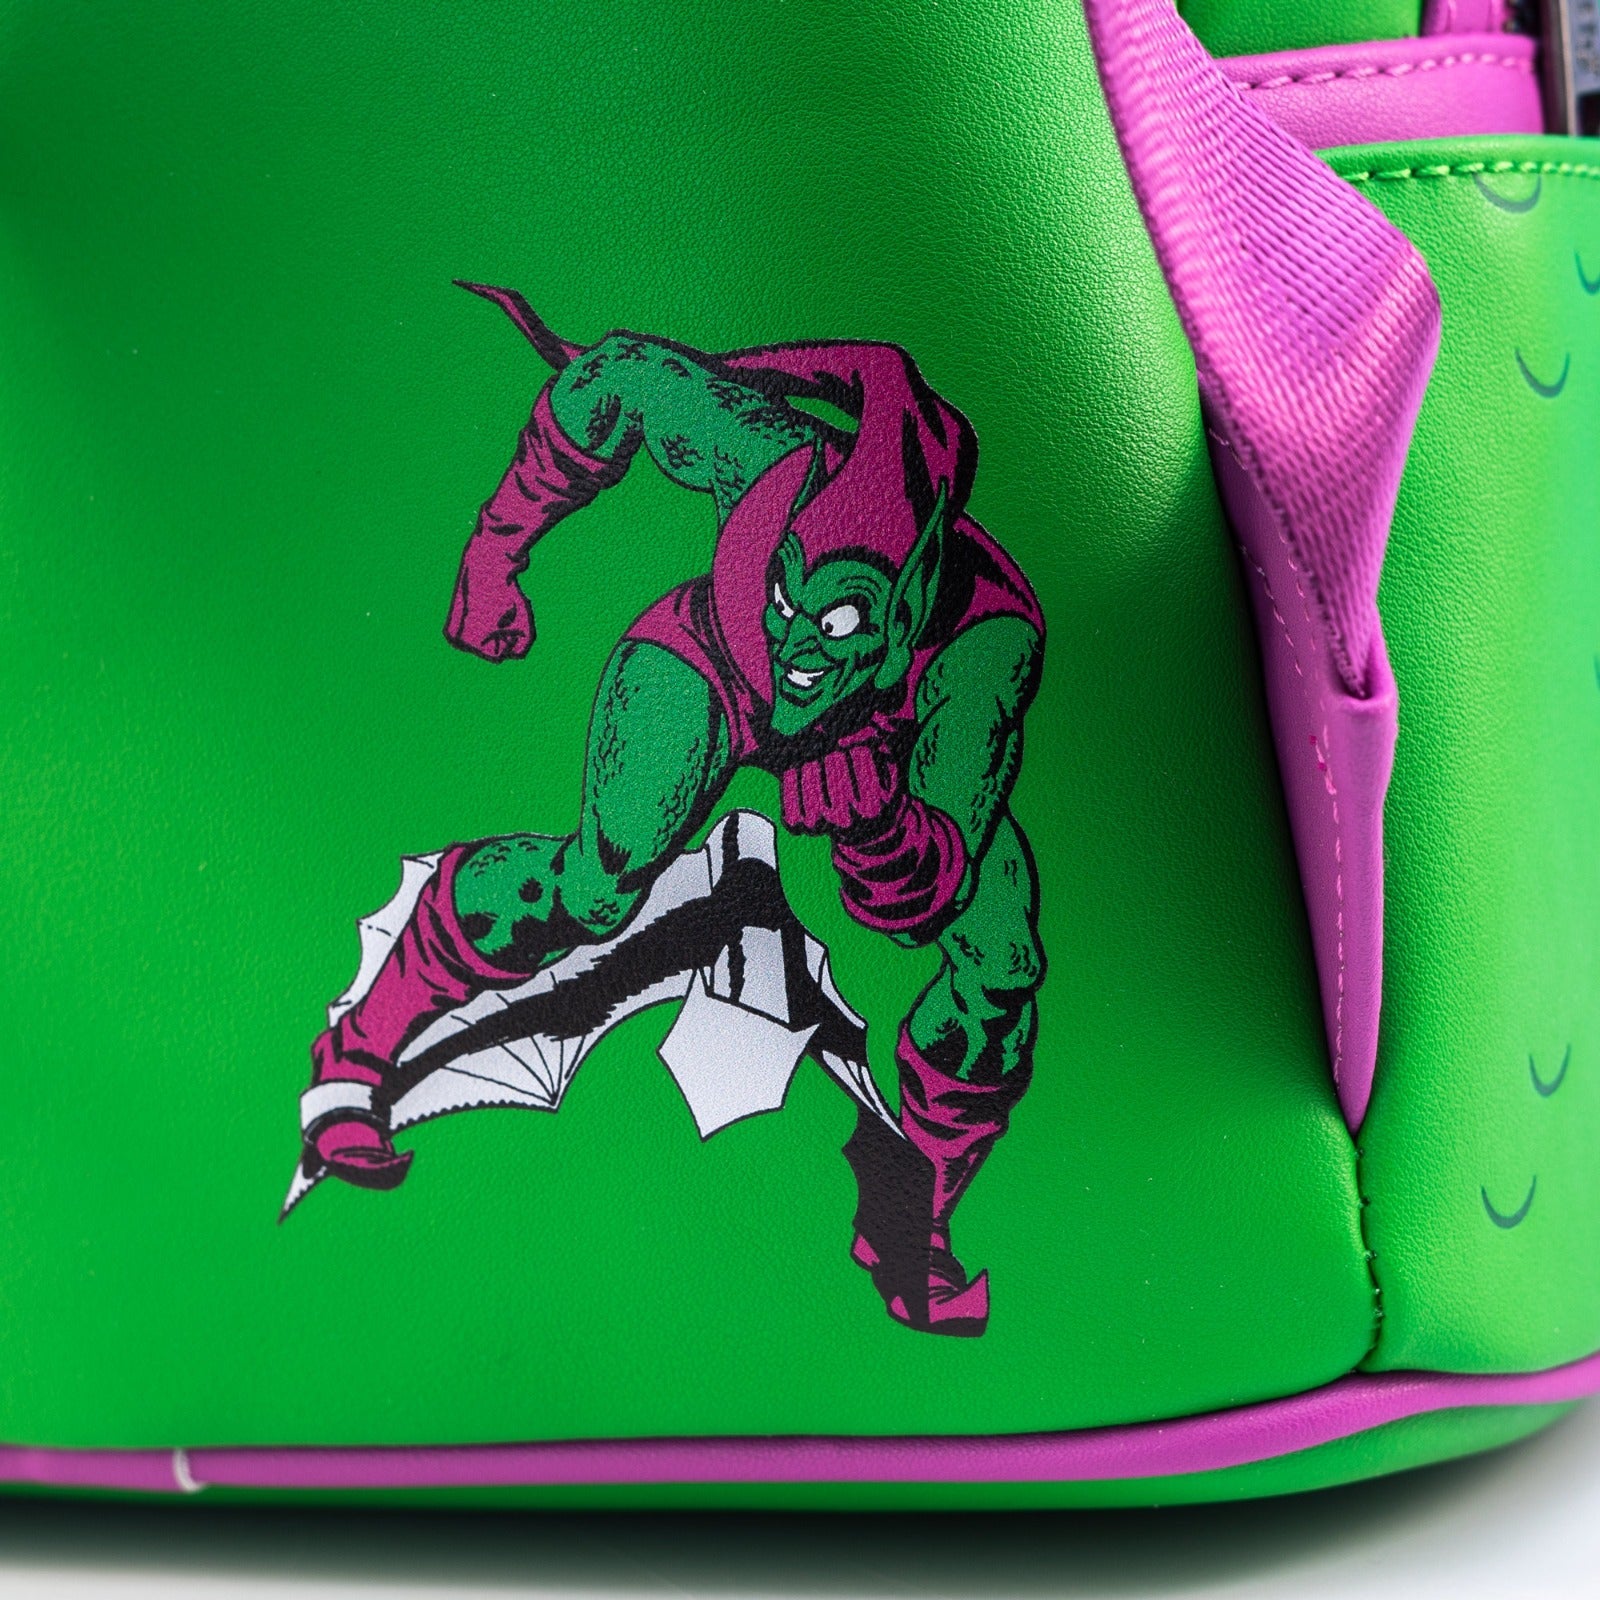 Loungefly x Marvel Green Goblin Cosplay MIni Backpack - GeekCore